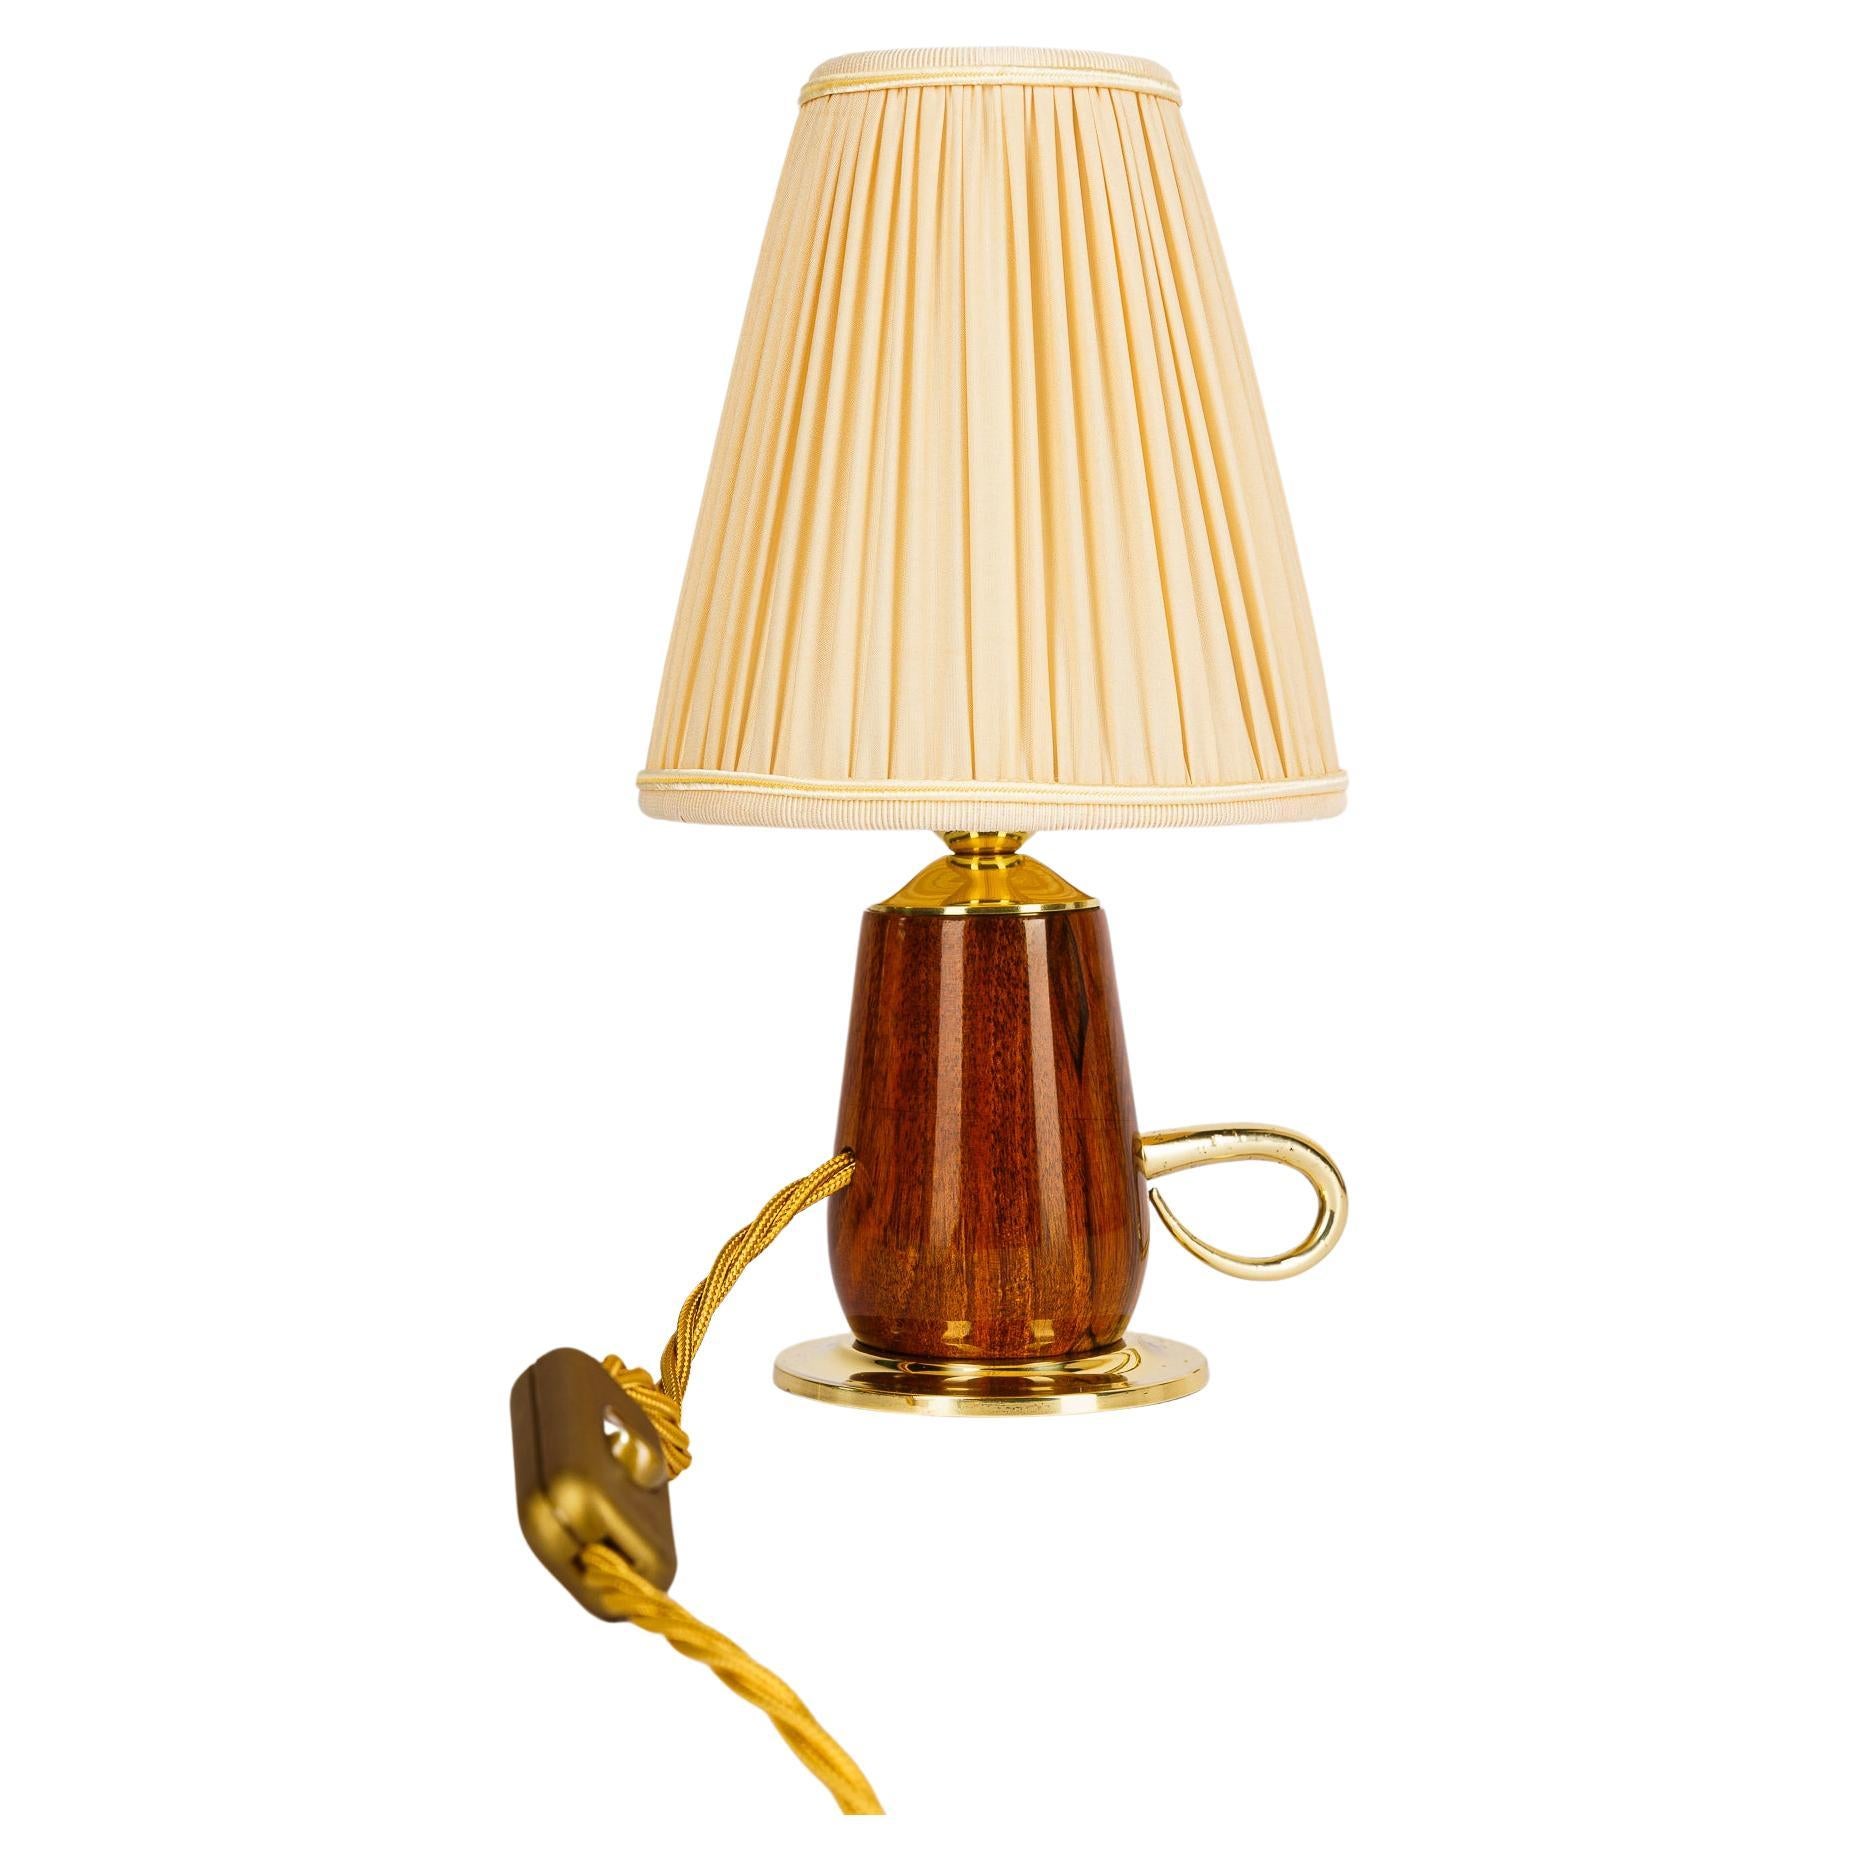 Rupert nikoll cherry wood table lamp with fabric shade vienna around 1950s For Sale